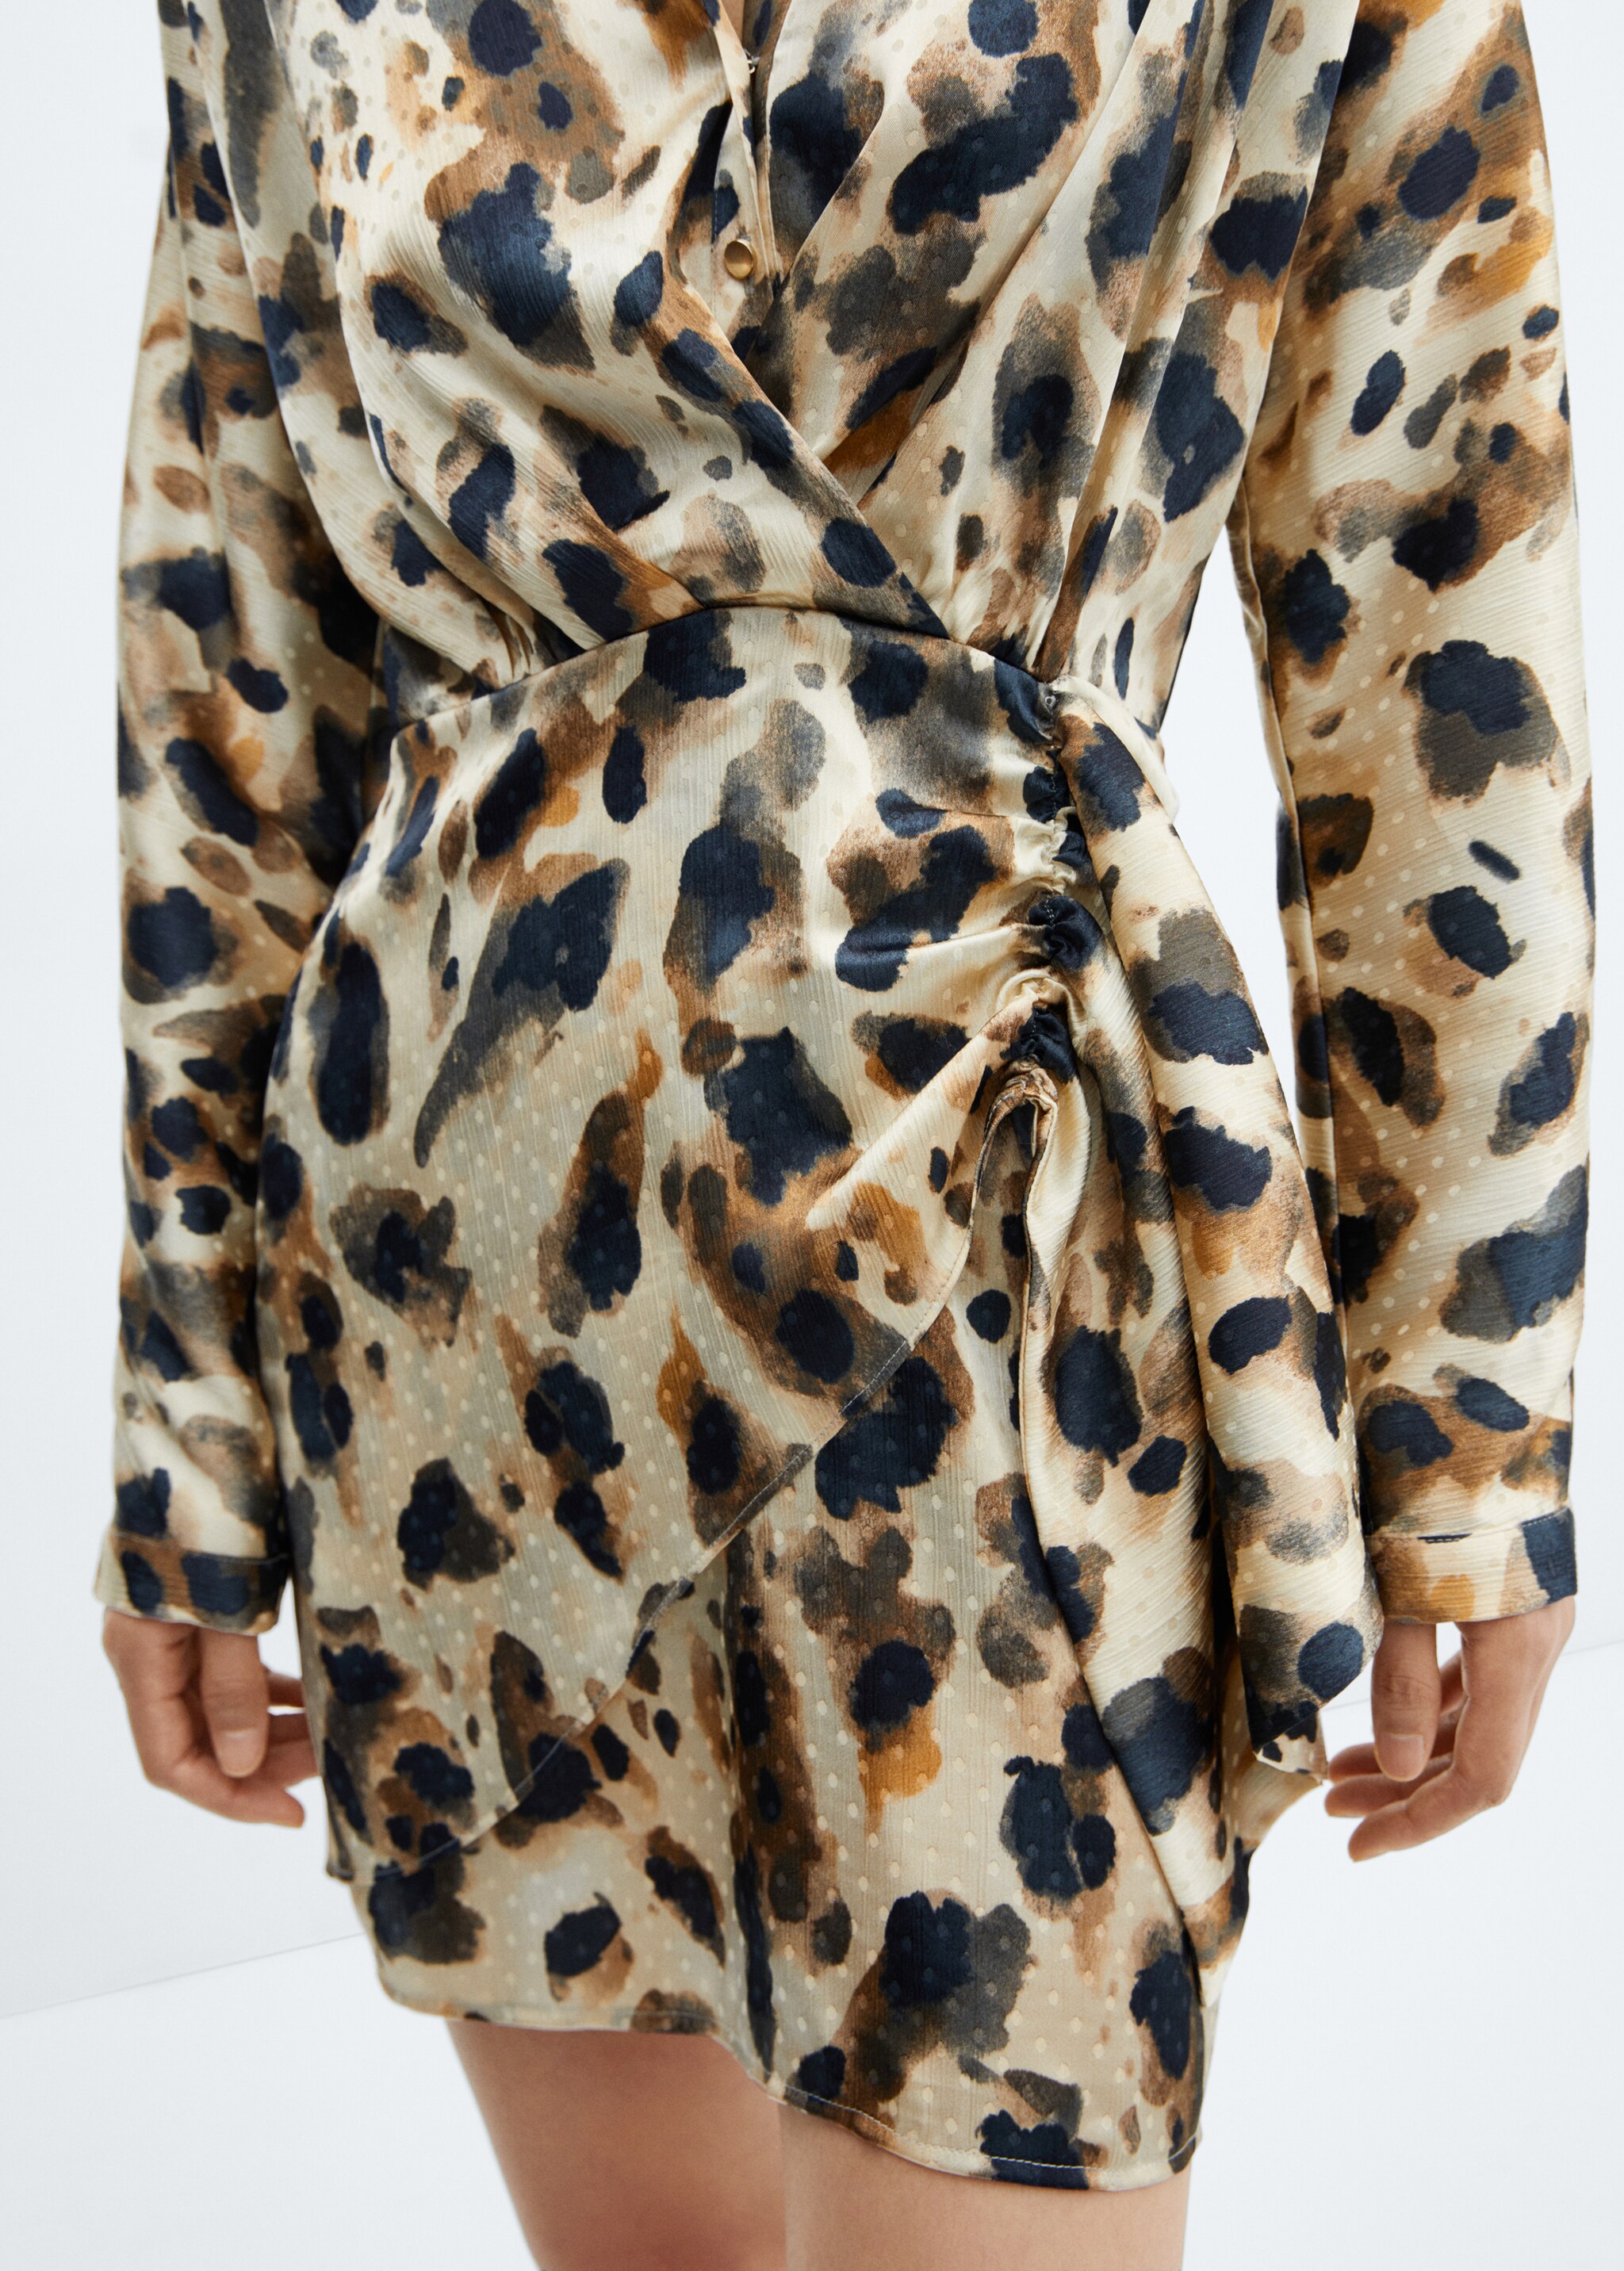 Leopard satin dress - Details of the article 6